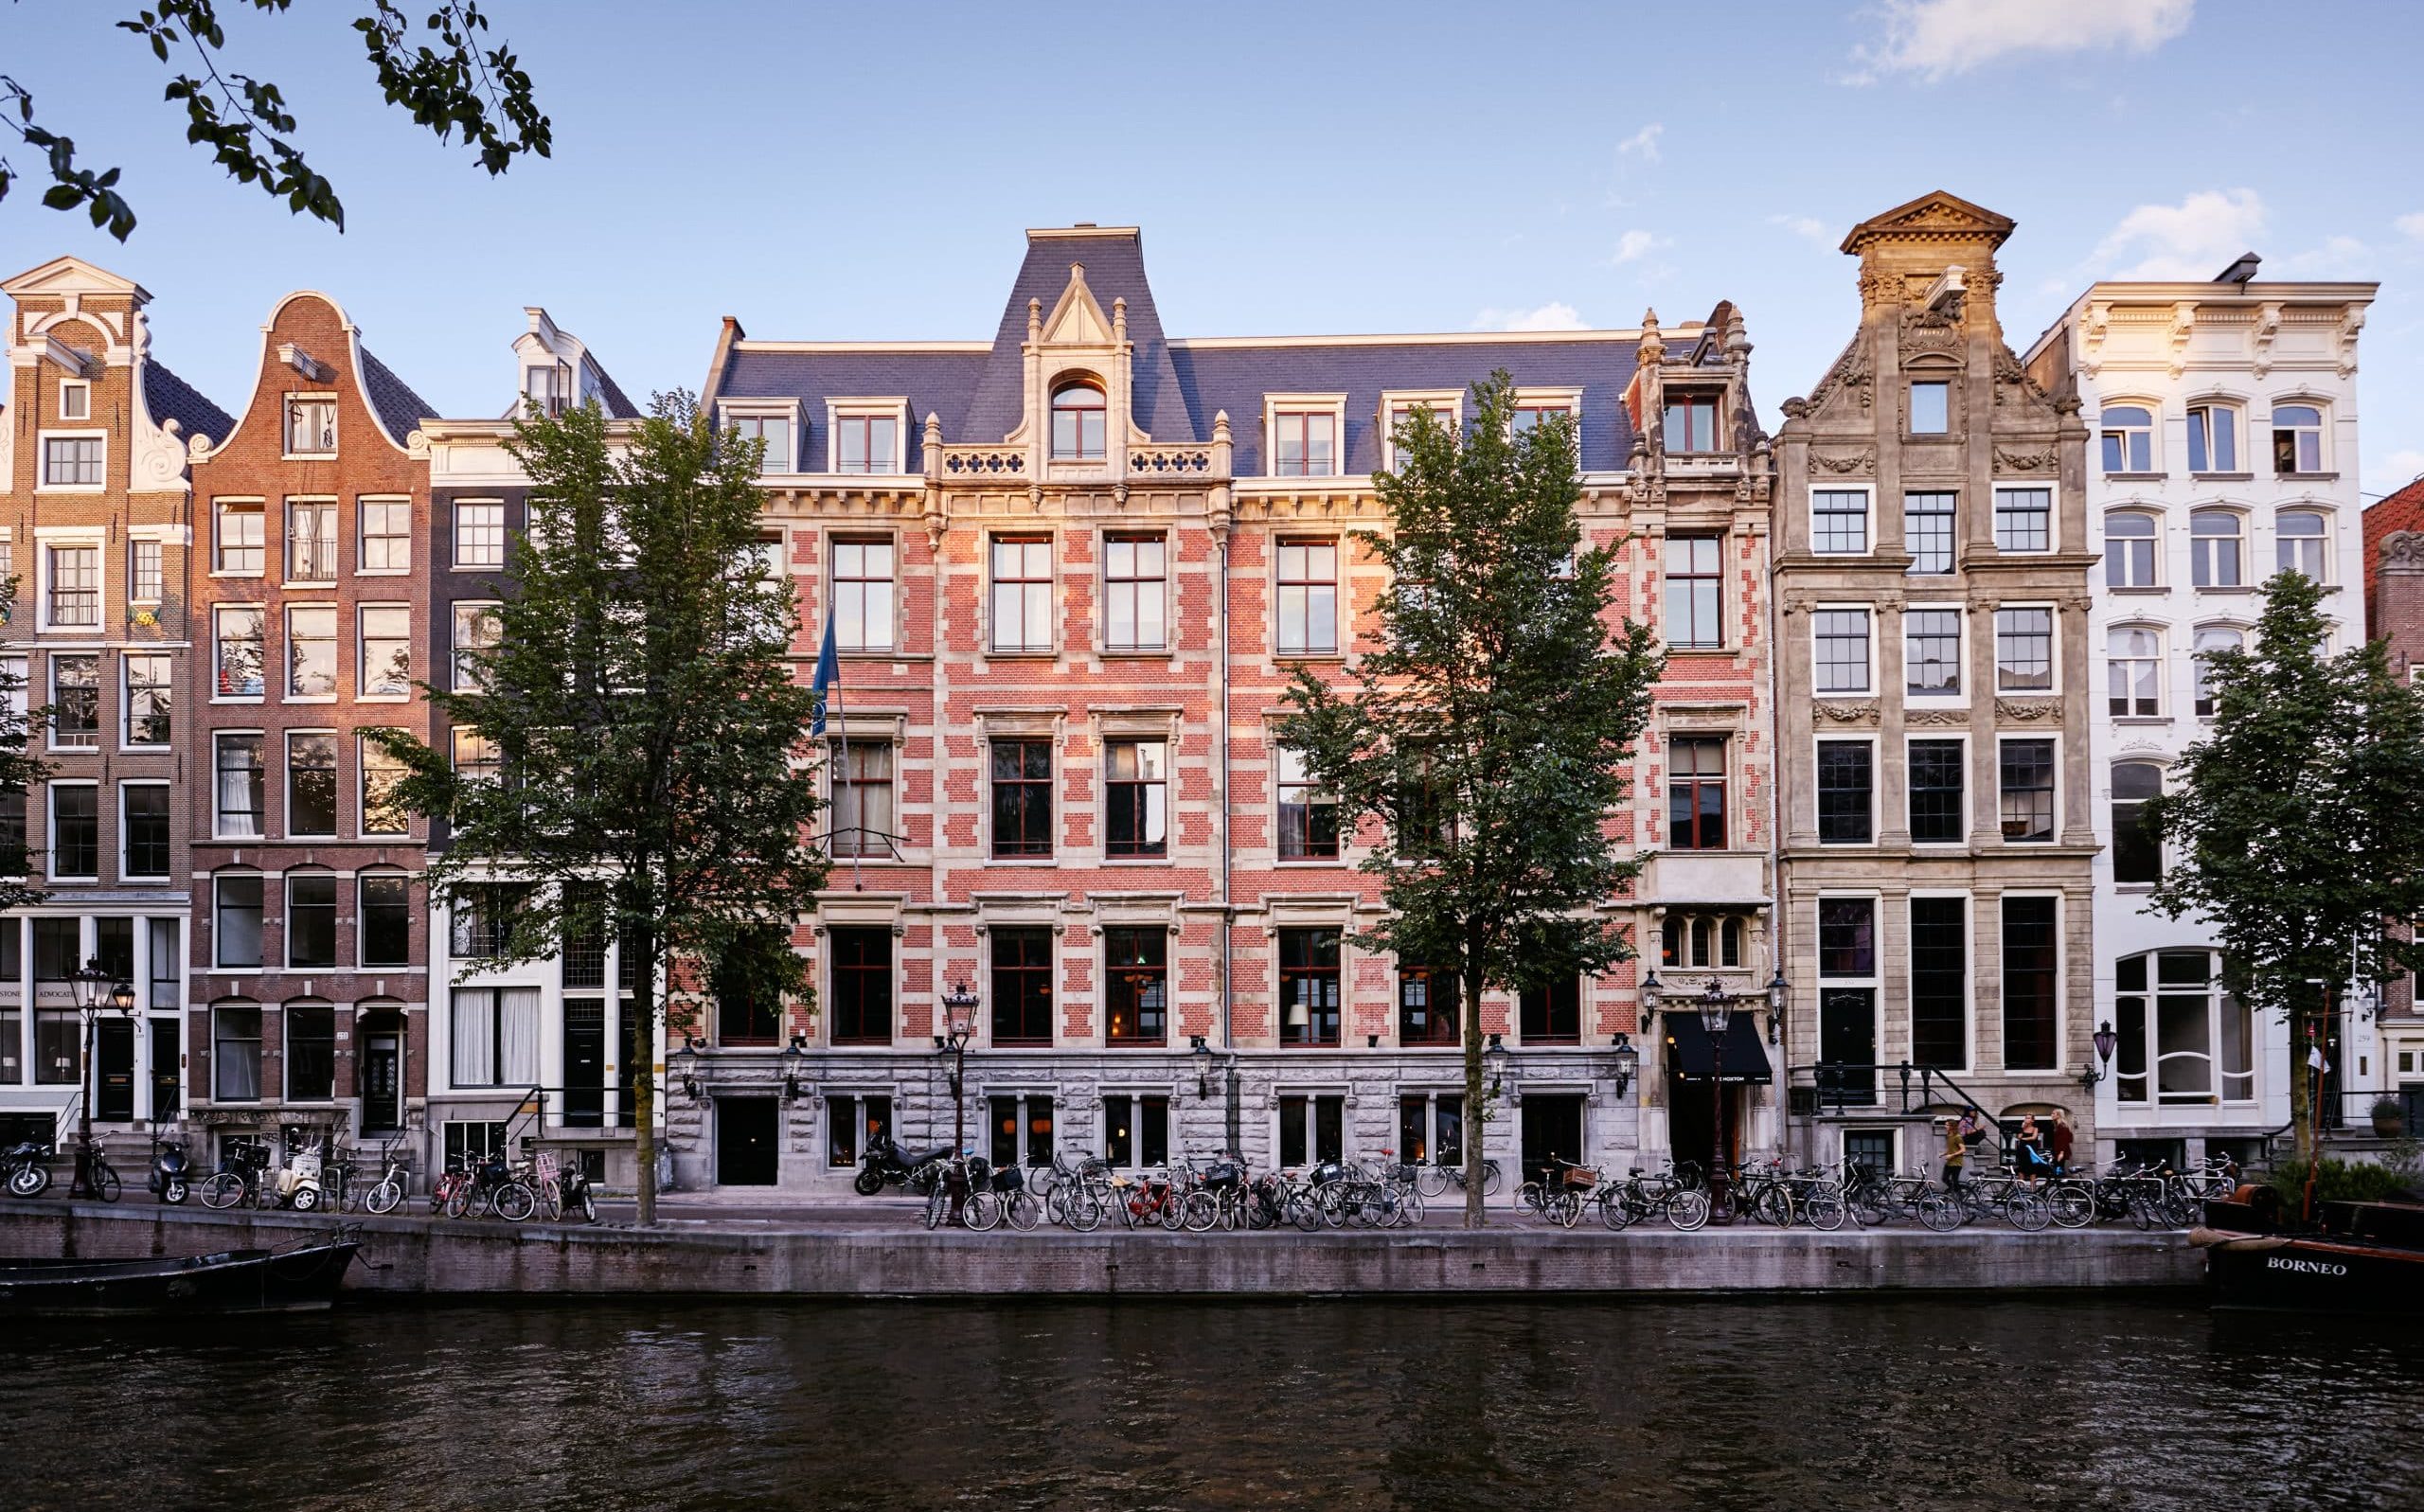 This Former Mayoral Residence Turned Hip Hotel Sits on Herengracht Canal in the Heart of Amsterdam